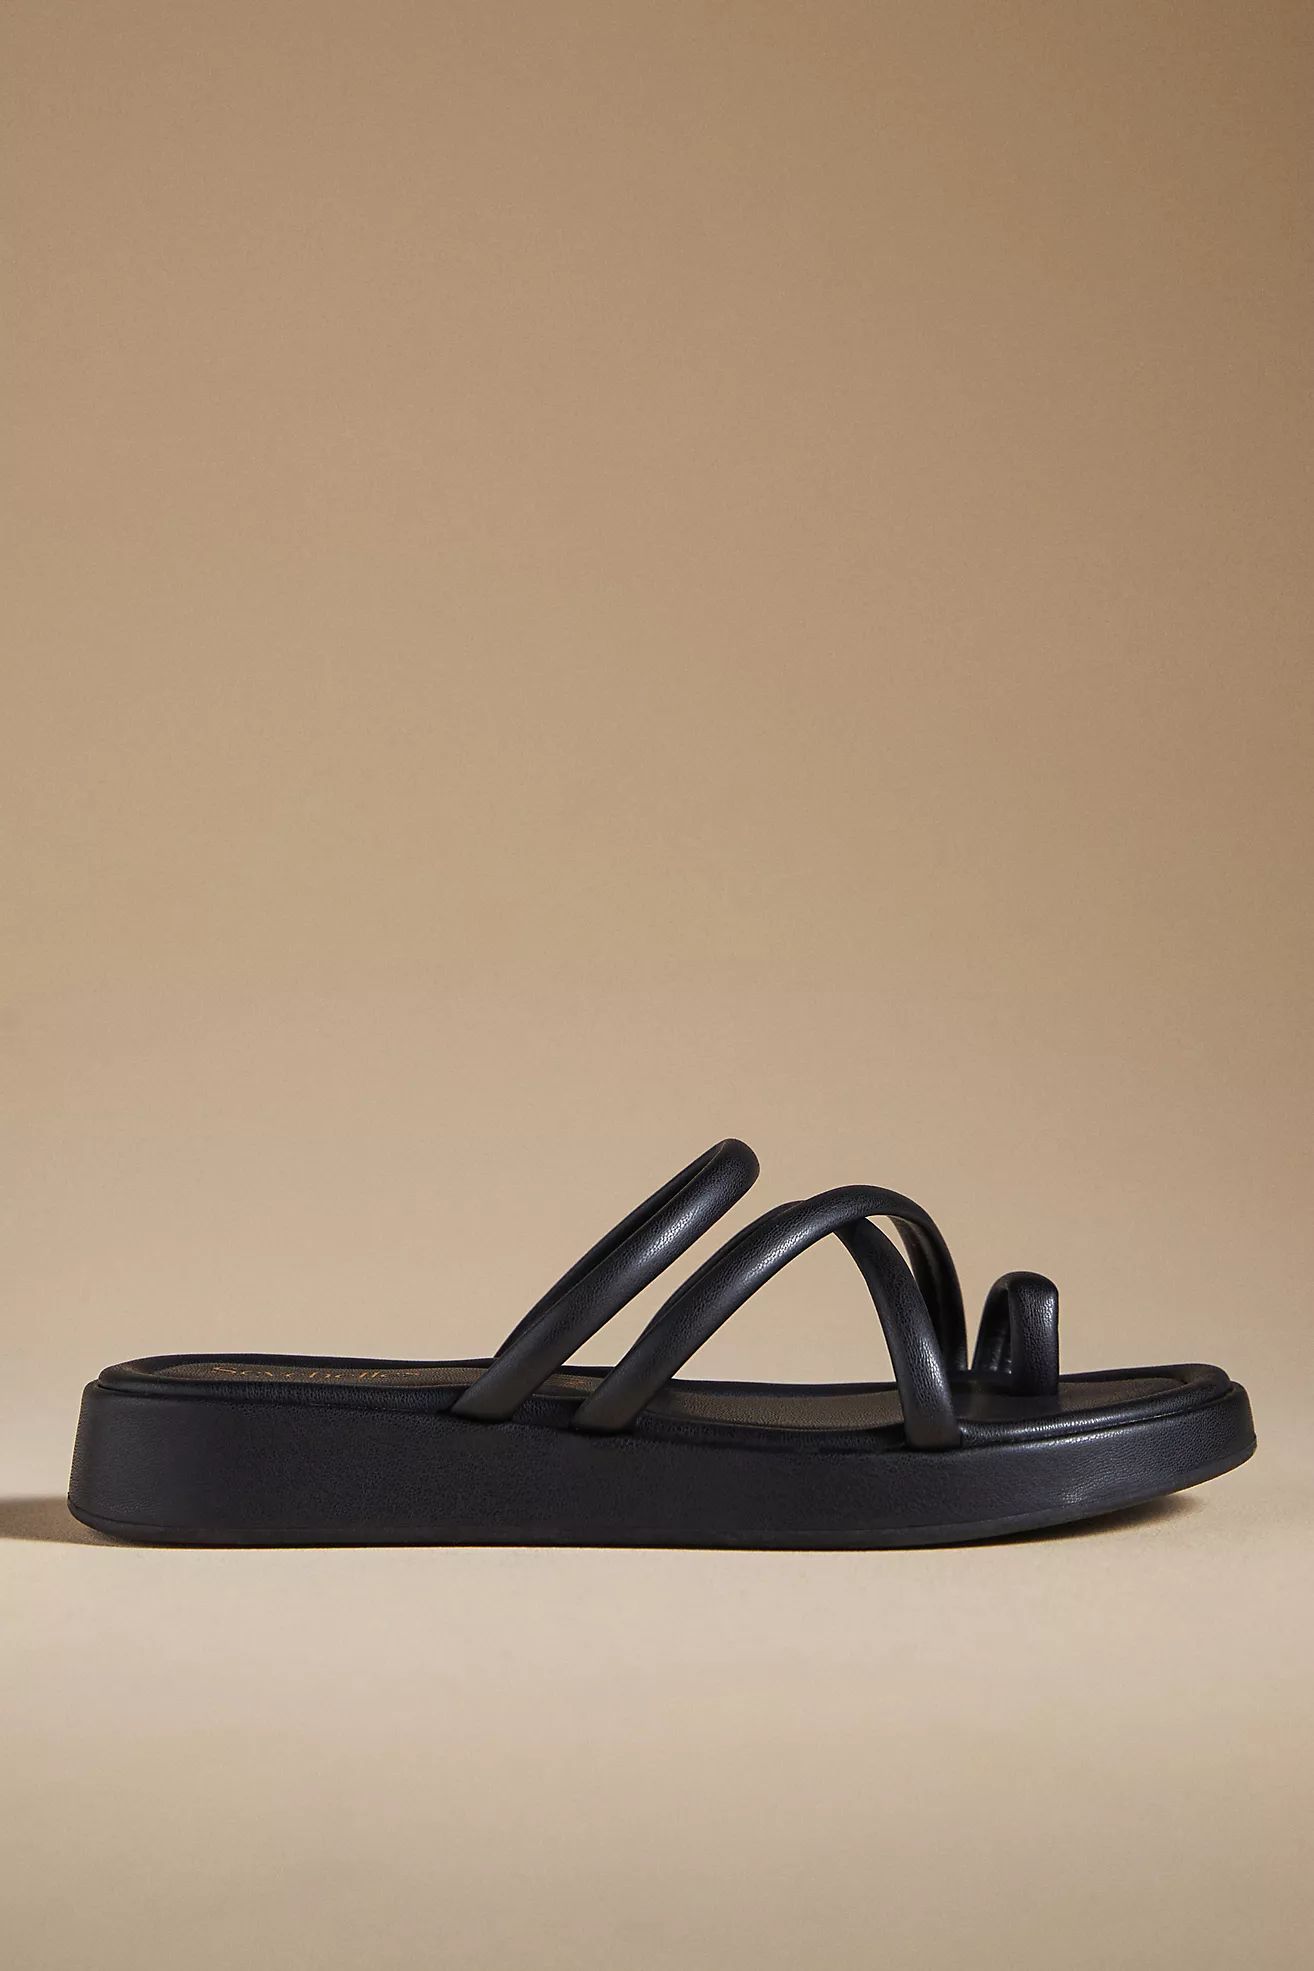 Seychelles Rule the World Sandals | Anthropologie (US)